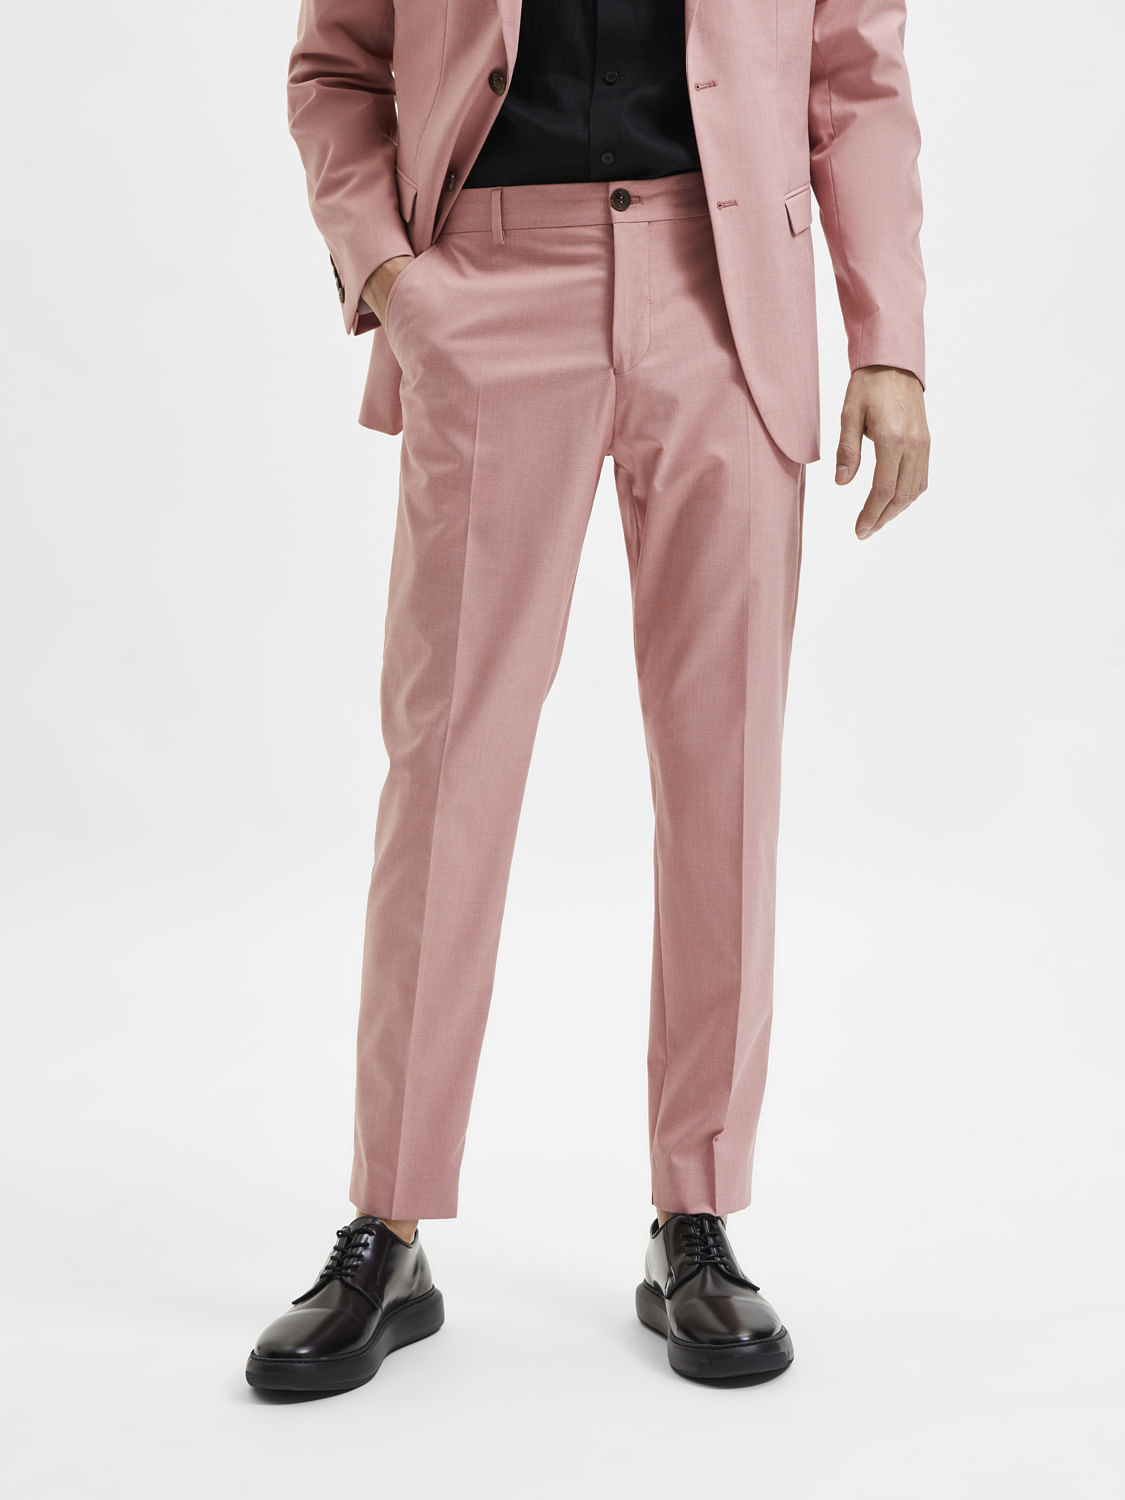 The Perfect Fit Suit Trousers  Effortless Gent